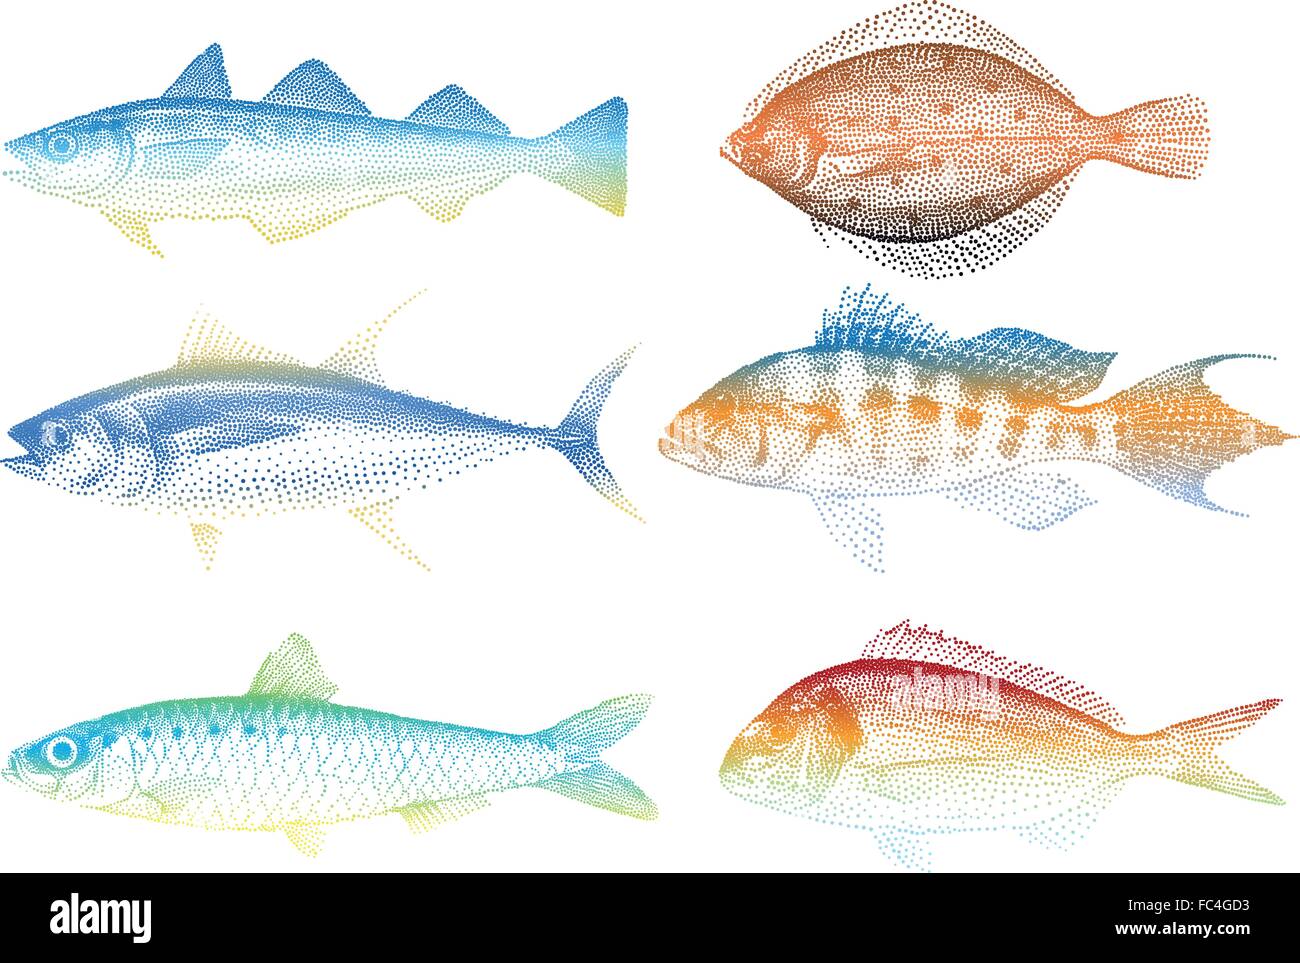 set of sea fishes, vector illustration Stock Vector